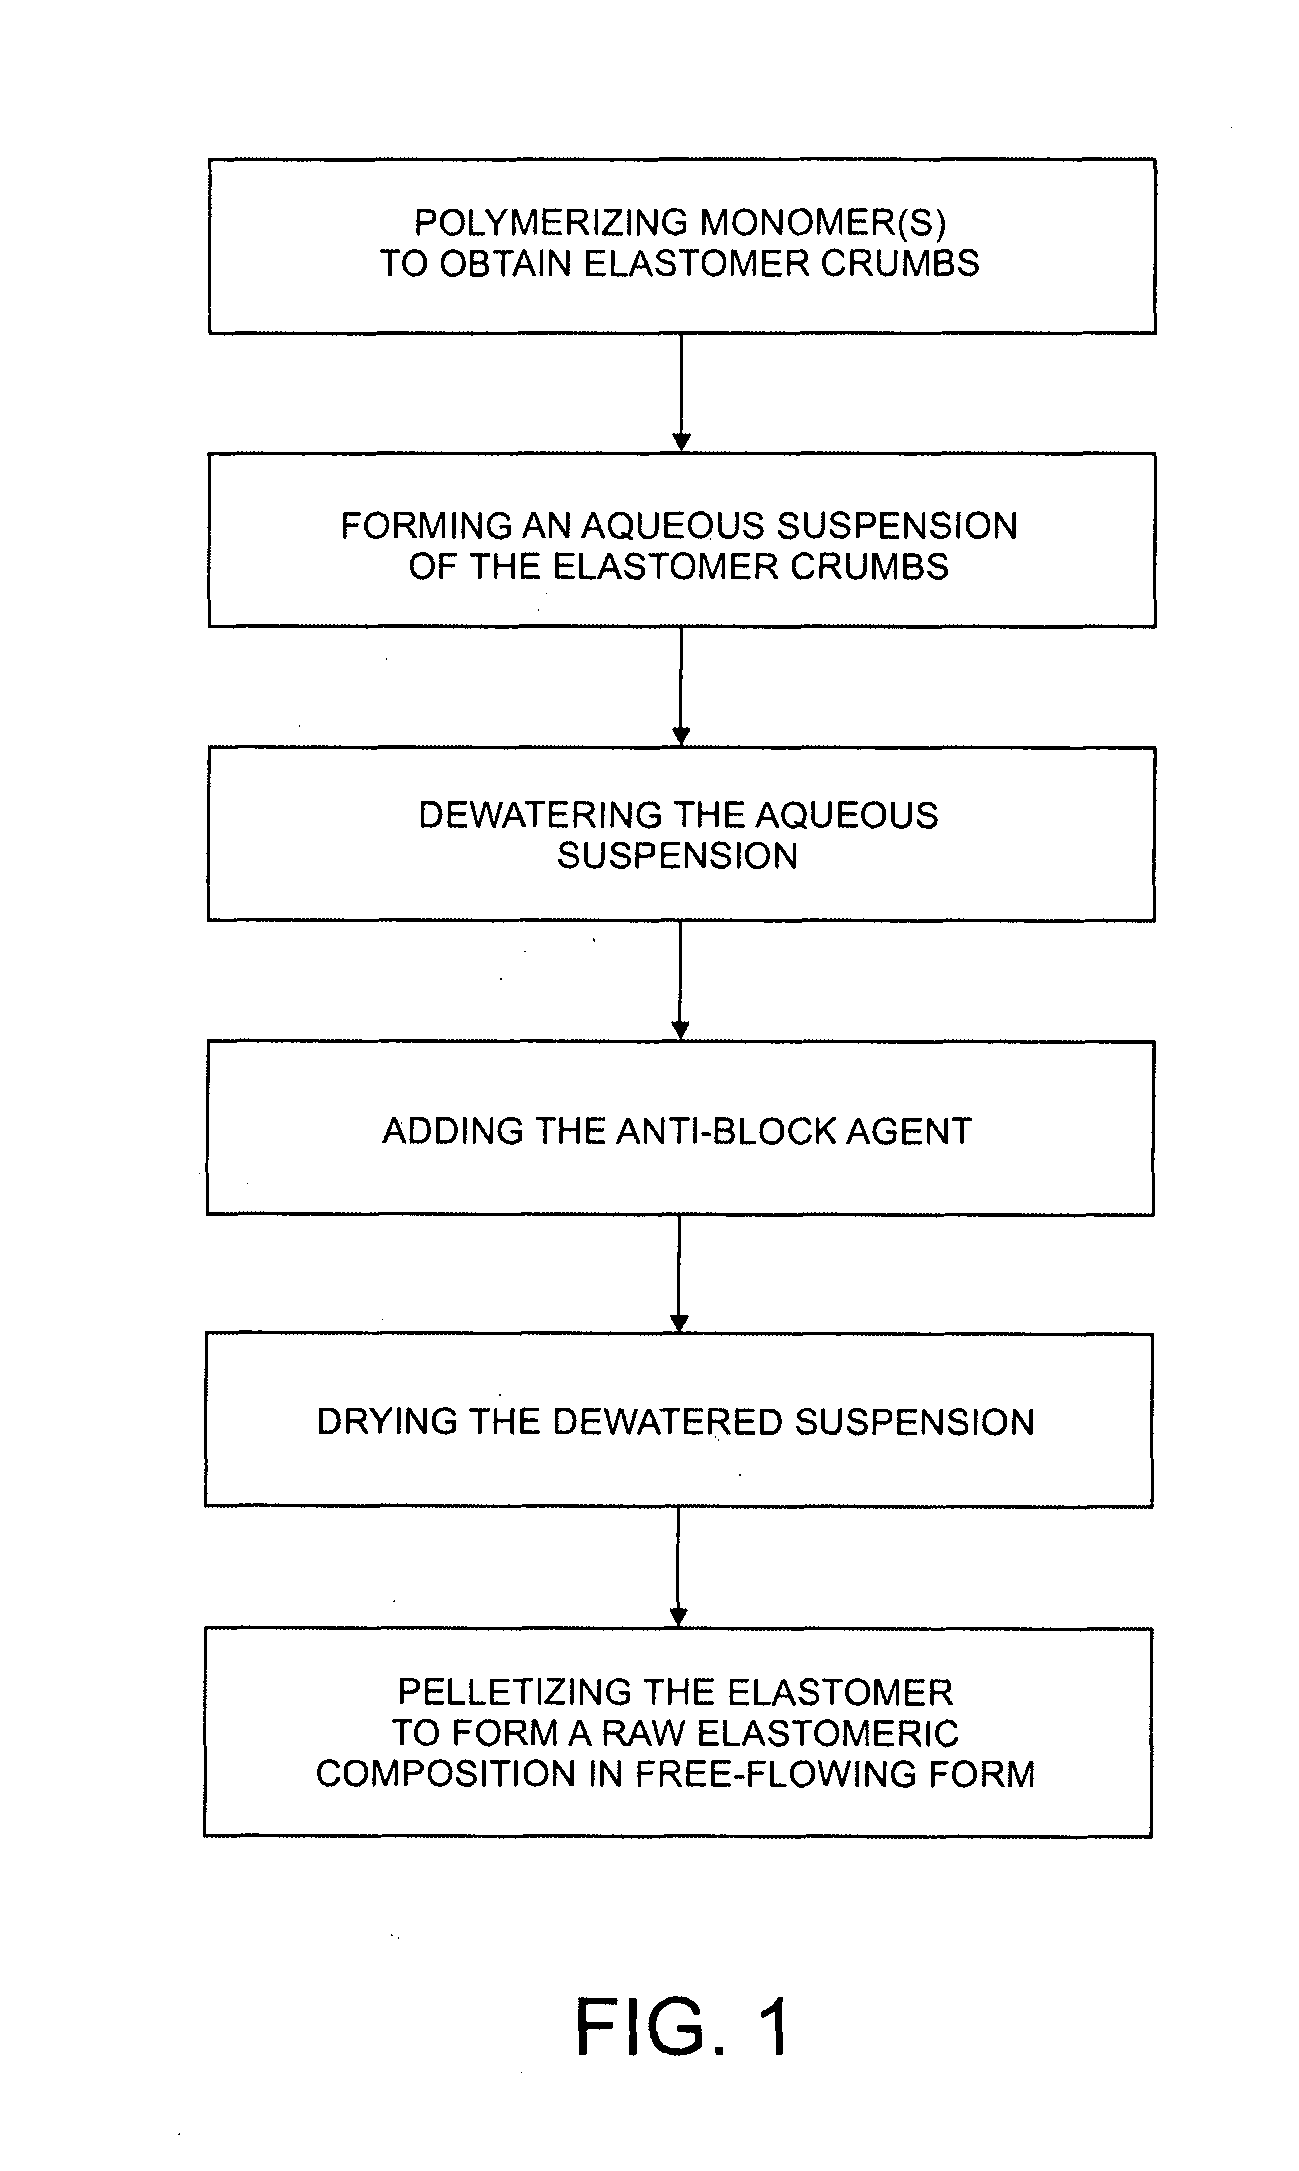 Synthetic raw elastomeric compositions in free-flowing pellet form and process for obtaining the same